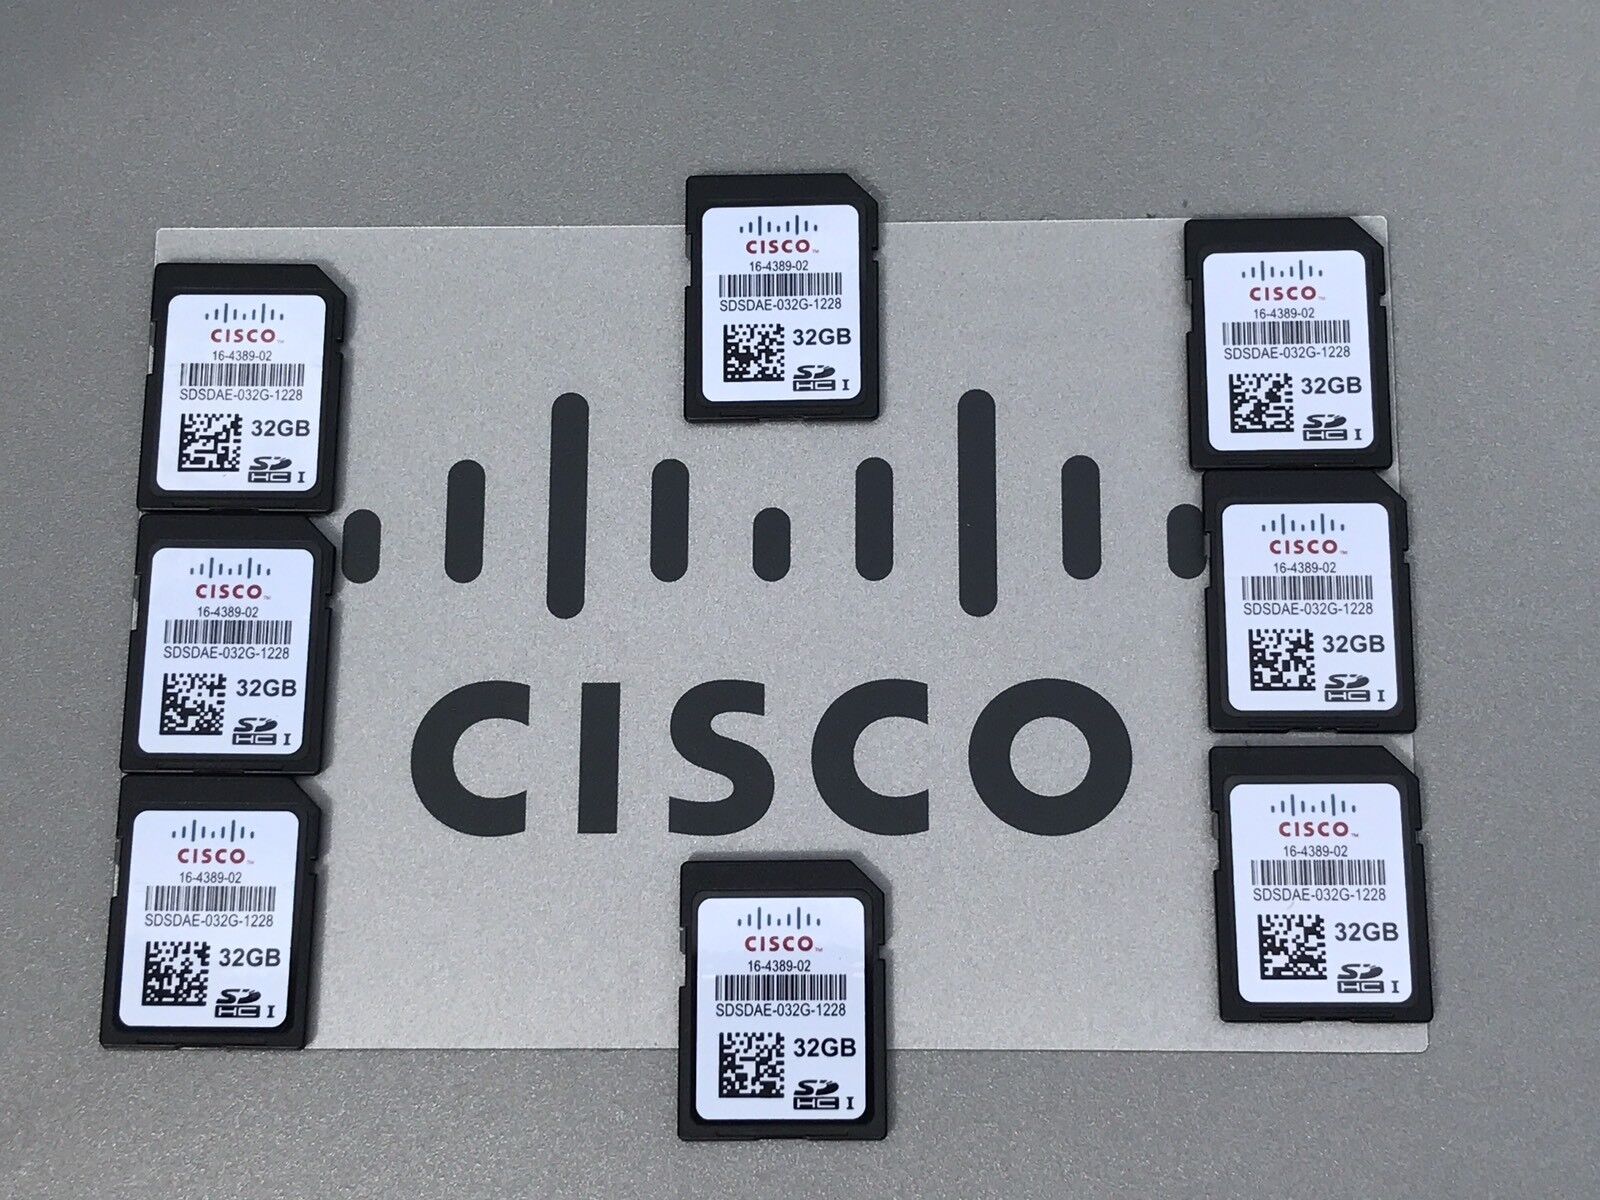 Cisco 16-4389-02 32GB SD Card SDSDAE-032G-1228 for Servers Switches Routers +Lenovo.